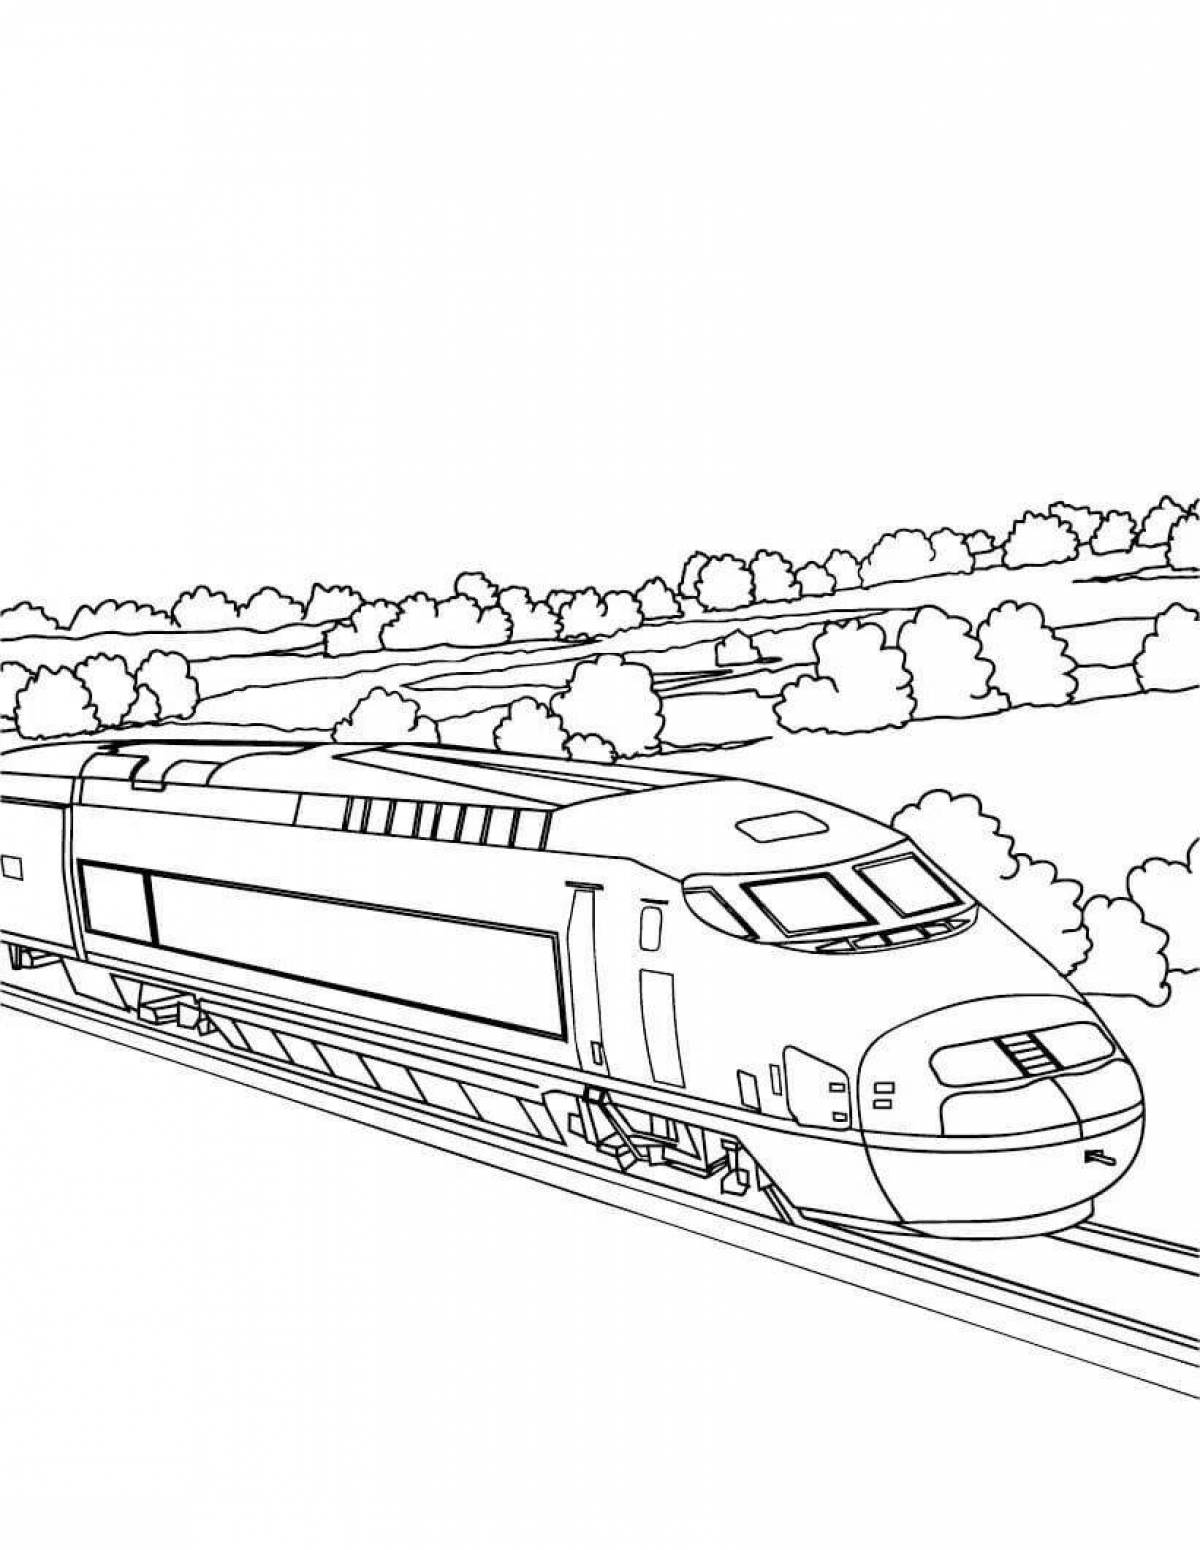 Exciting passenger train coloring page